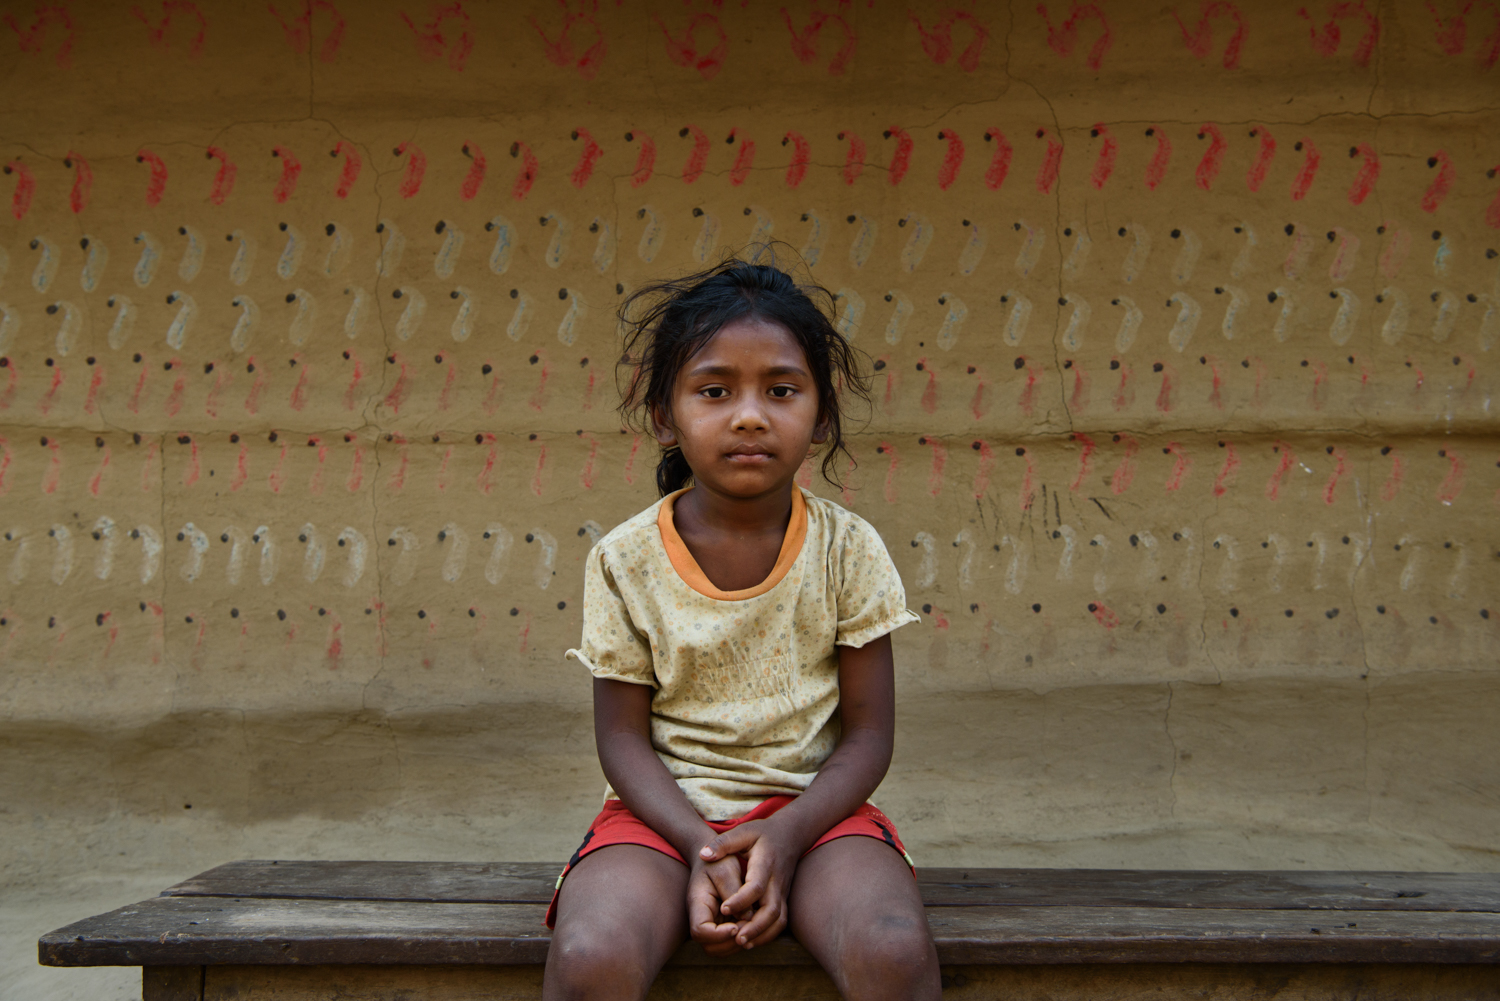  Pratigya Majhi (5) studies in nursery grade and is the only child in the Malpur village
community attending a private school. Pratigya's education is supported by a foreigner through a scholarship. 